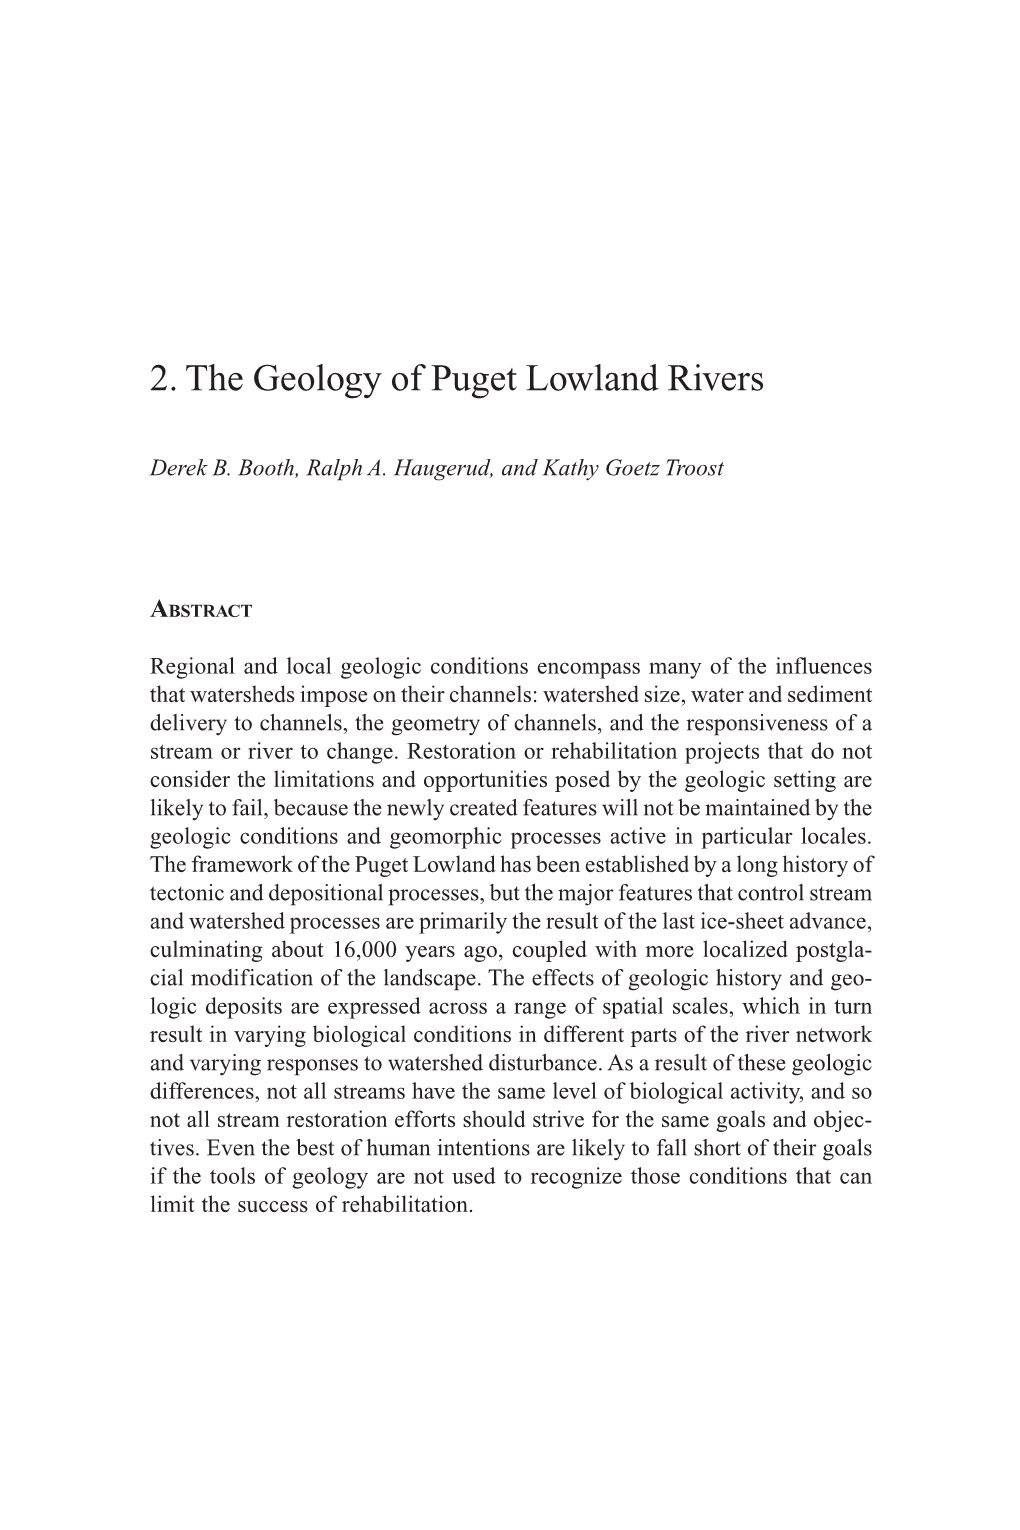 2. the Geology of Puget Lowland Rivers